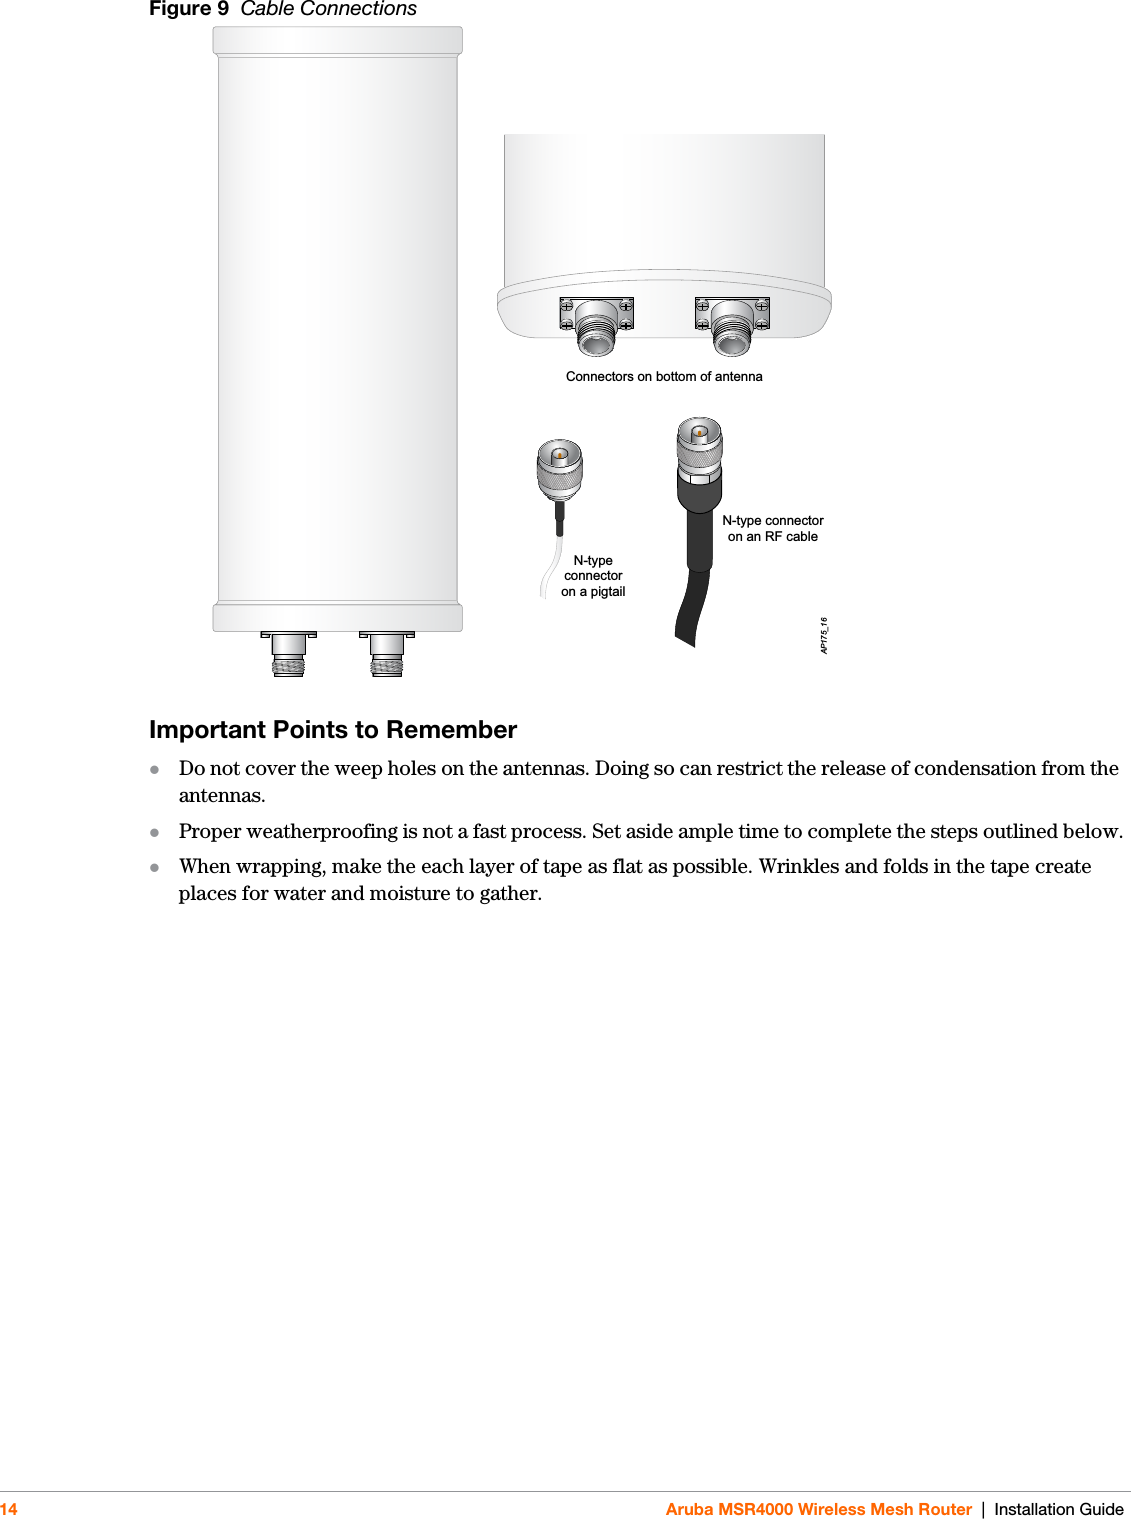 14 Aruba MSR4000 Wireless Mesh Router | Installation GuideFigure 9  Cable Connections Important Points to RememberDo not cover the weep holes on the antennas. Doing so can restrict the release of condensation from the antennas.Proper weatherproofing is not a fast process. Set aside ample time to complete the steps outlined below.When wrapping, make the each layer of tape as flat as possible. Wrinkles and folds in the tape create places for water and moisture to gather. AP175_16Connectors on bottom of antennaN-type connectoron an RF cableN-typeconnectoron a pigtail